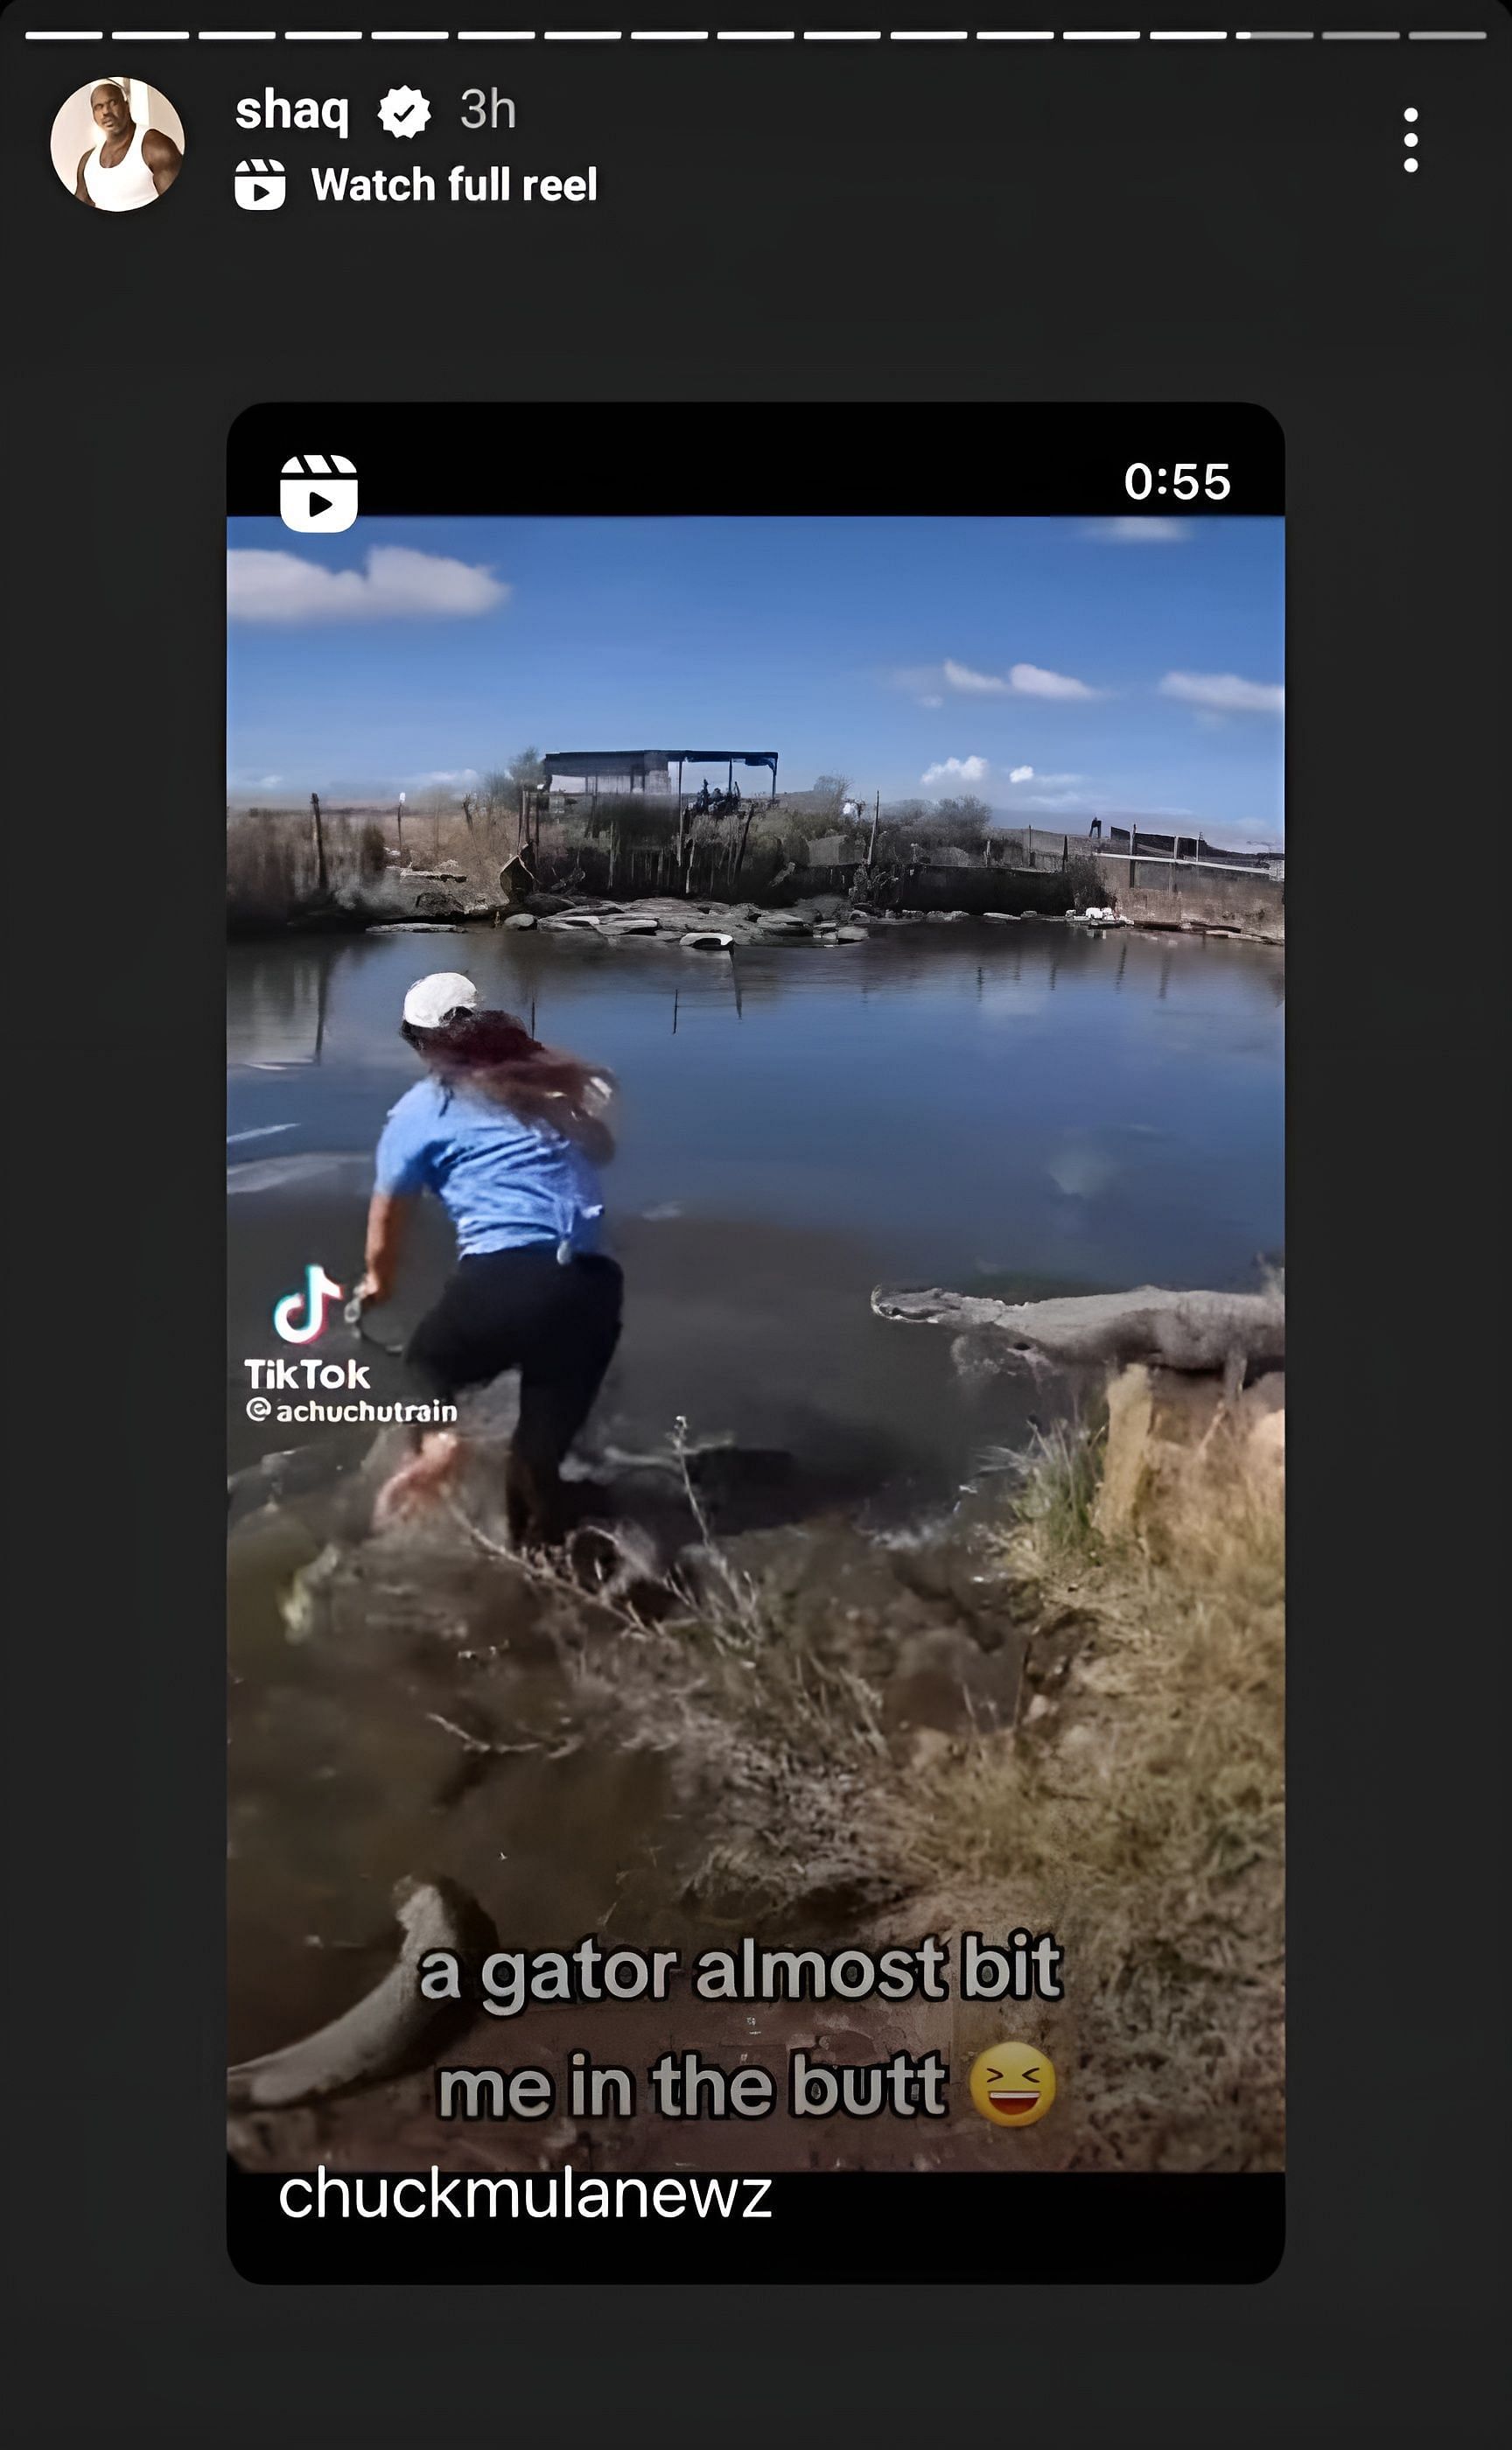 O&rsquo;Neal shares a viral video of a fearless woman jumping into an alligator enclosure